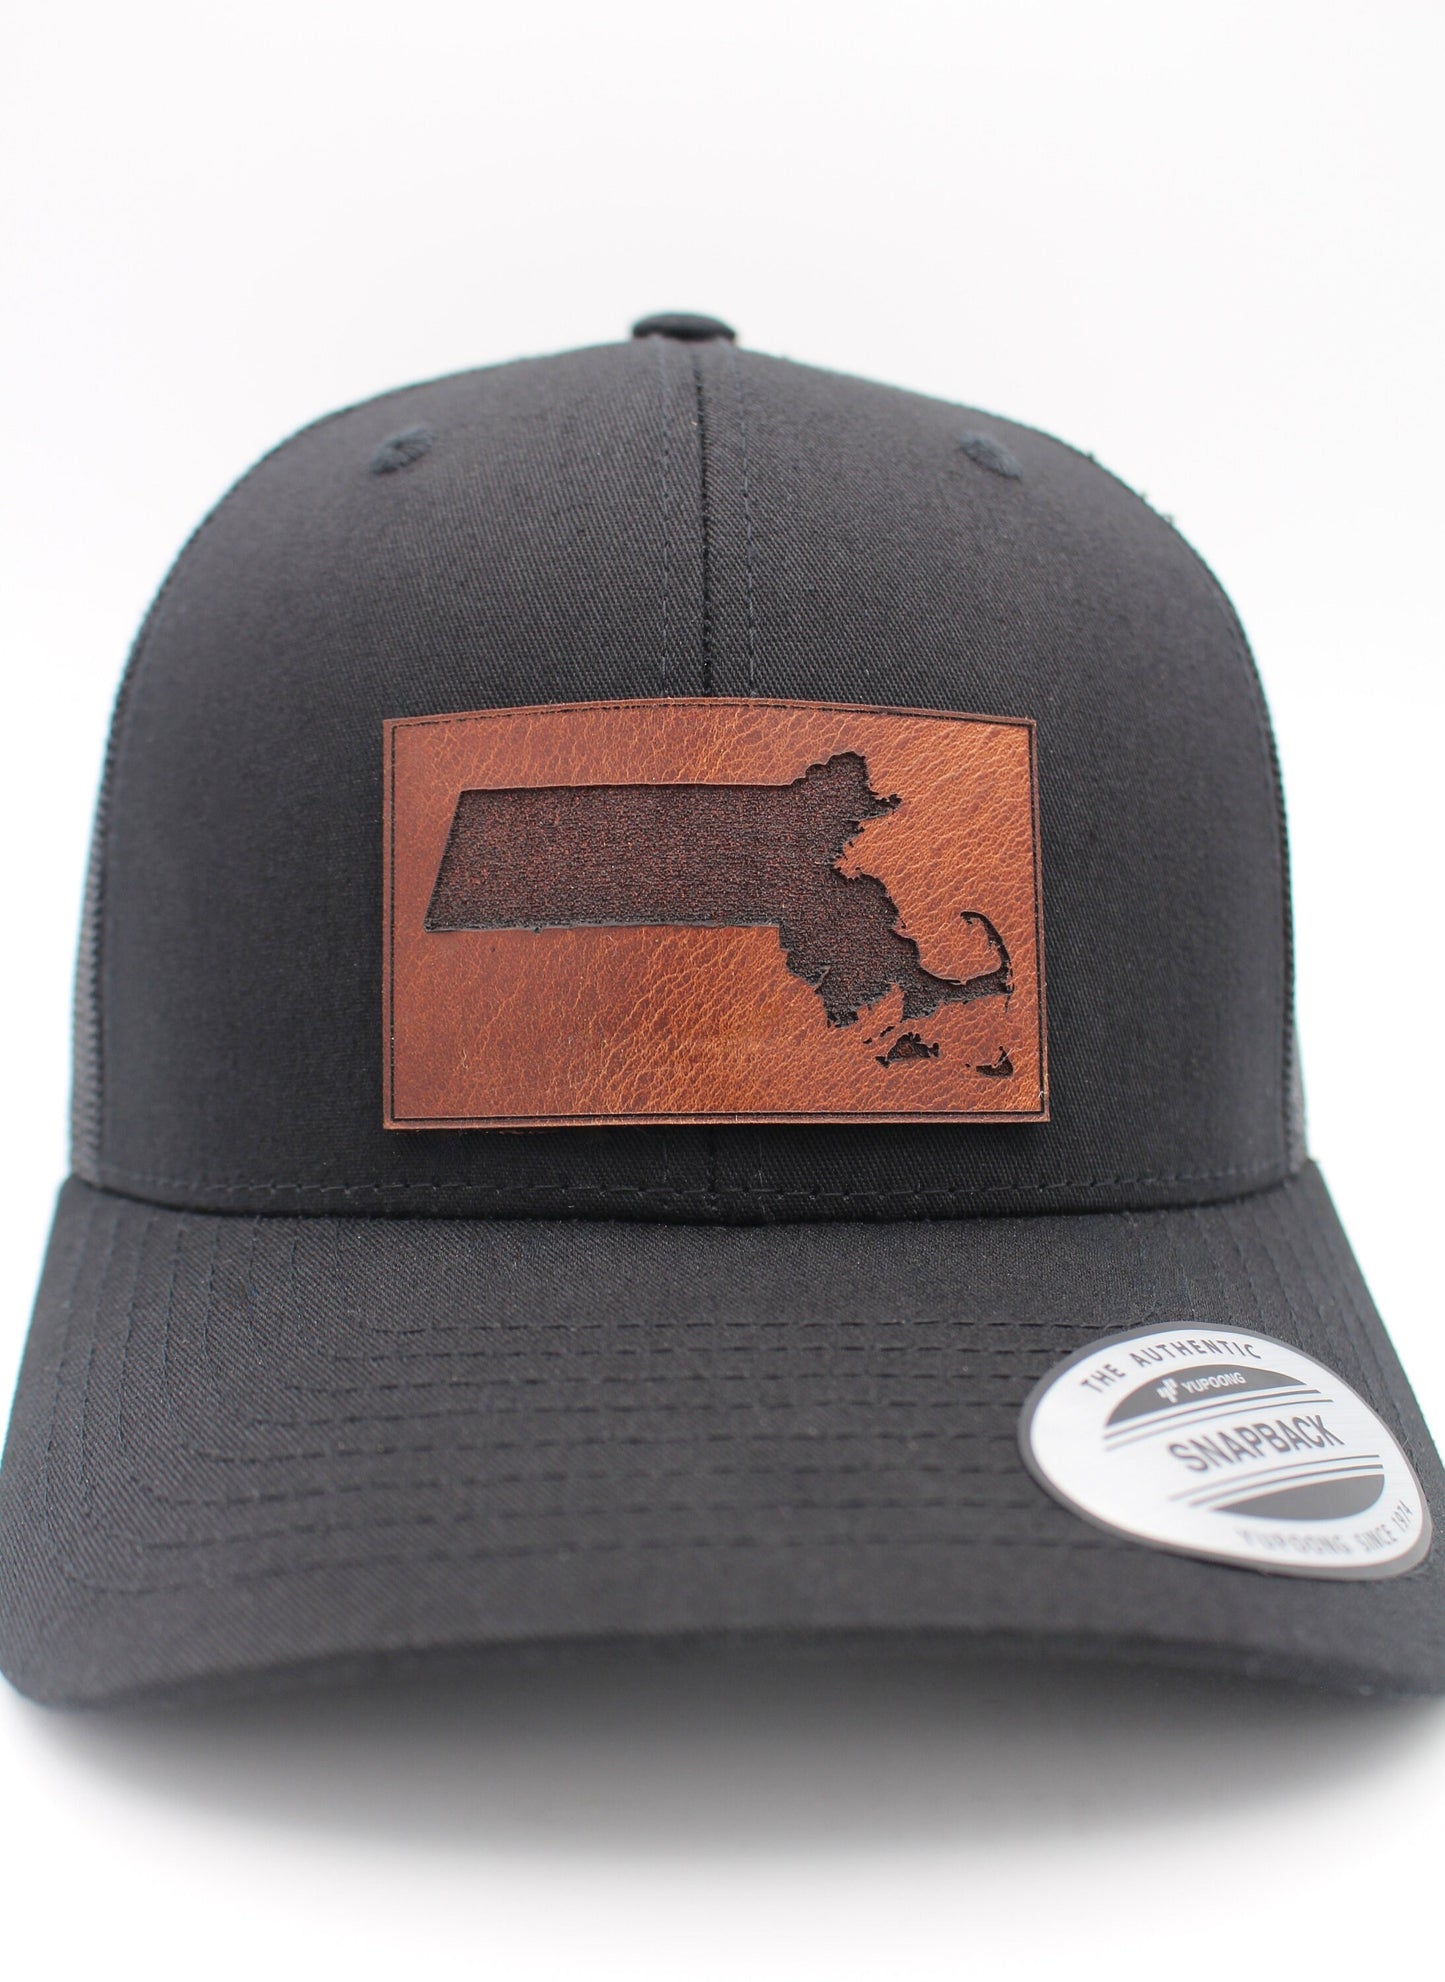 MASSACHUSETTS Leather Patch Hat